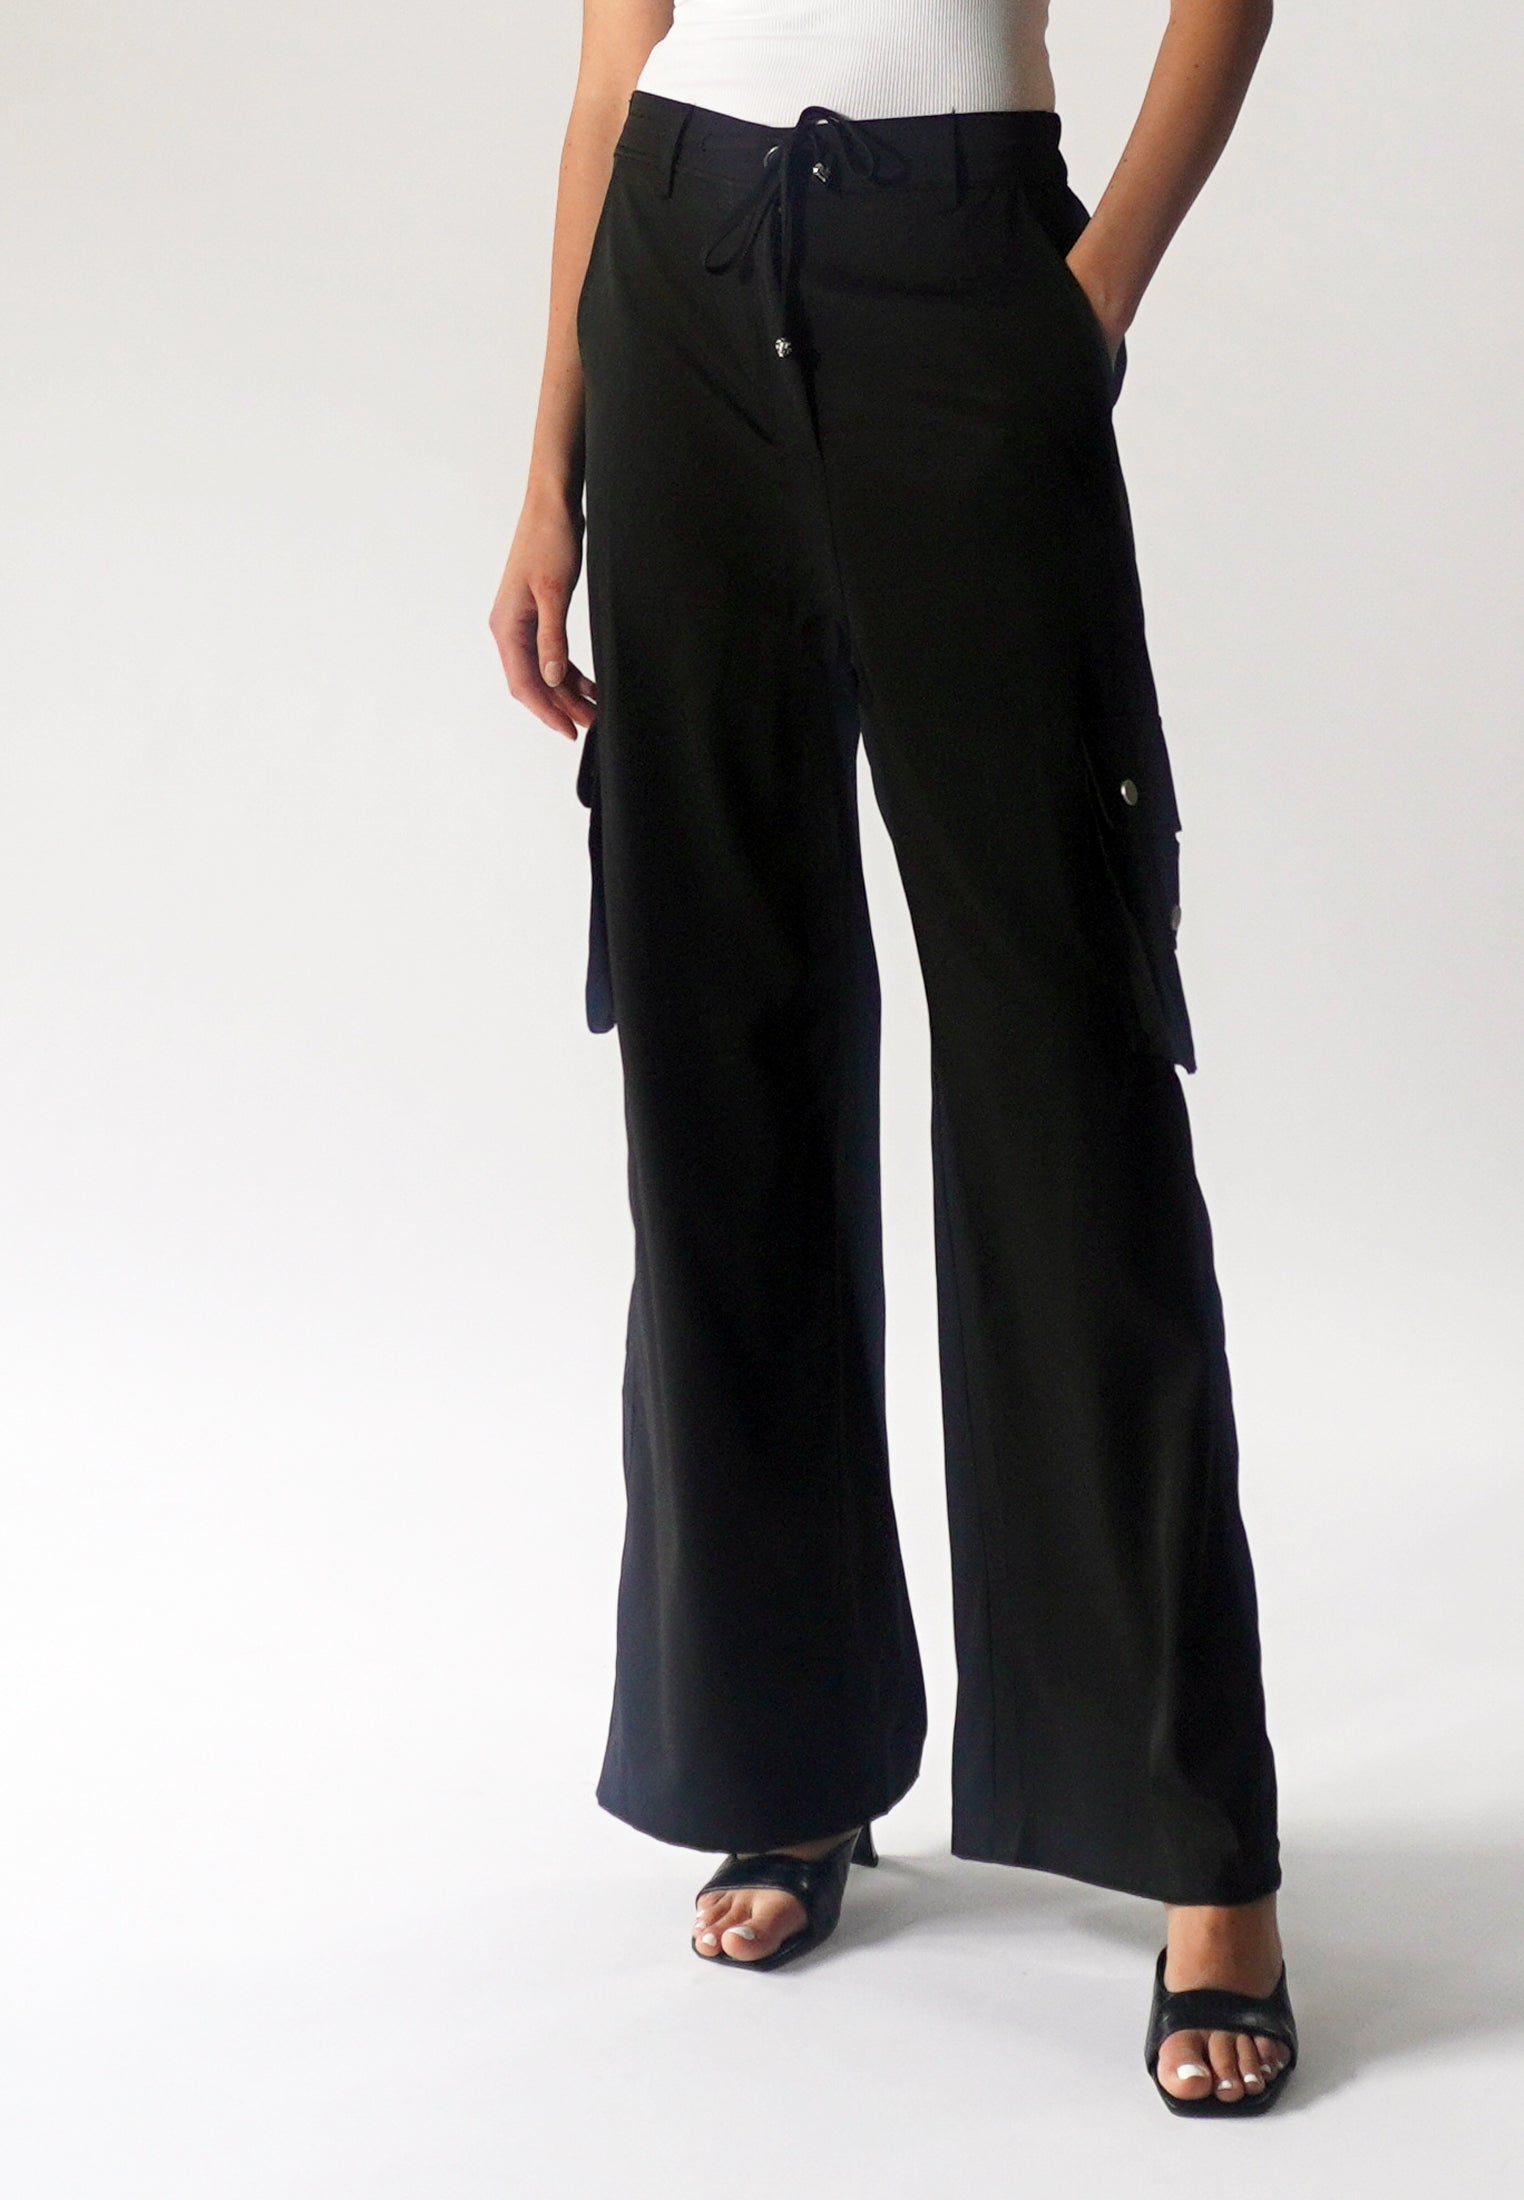 .com .com: Daily Ritual Women's Oversized Terry Cotton and  Modal Wide Leg Pant, Black, Medium : Clothing, Shoes & Jewelry